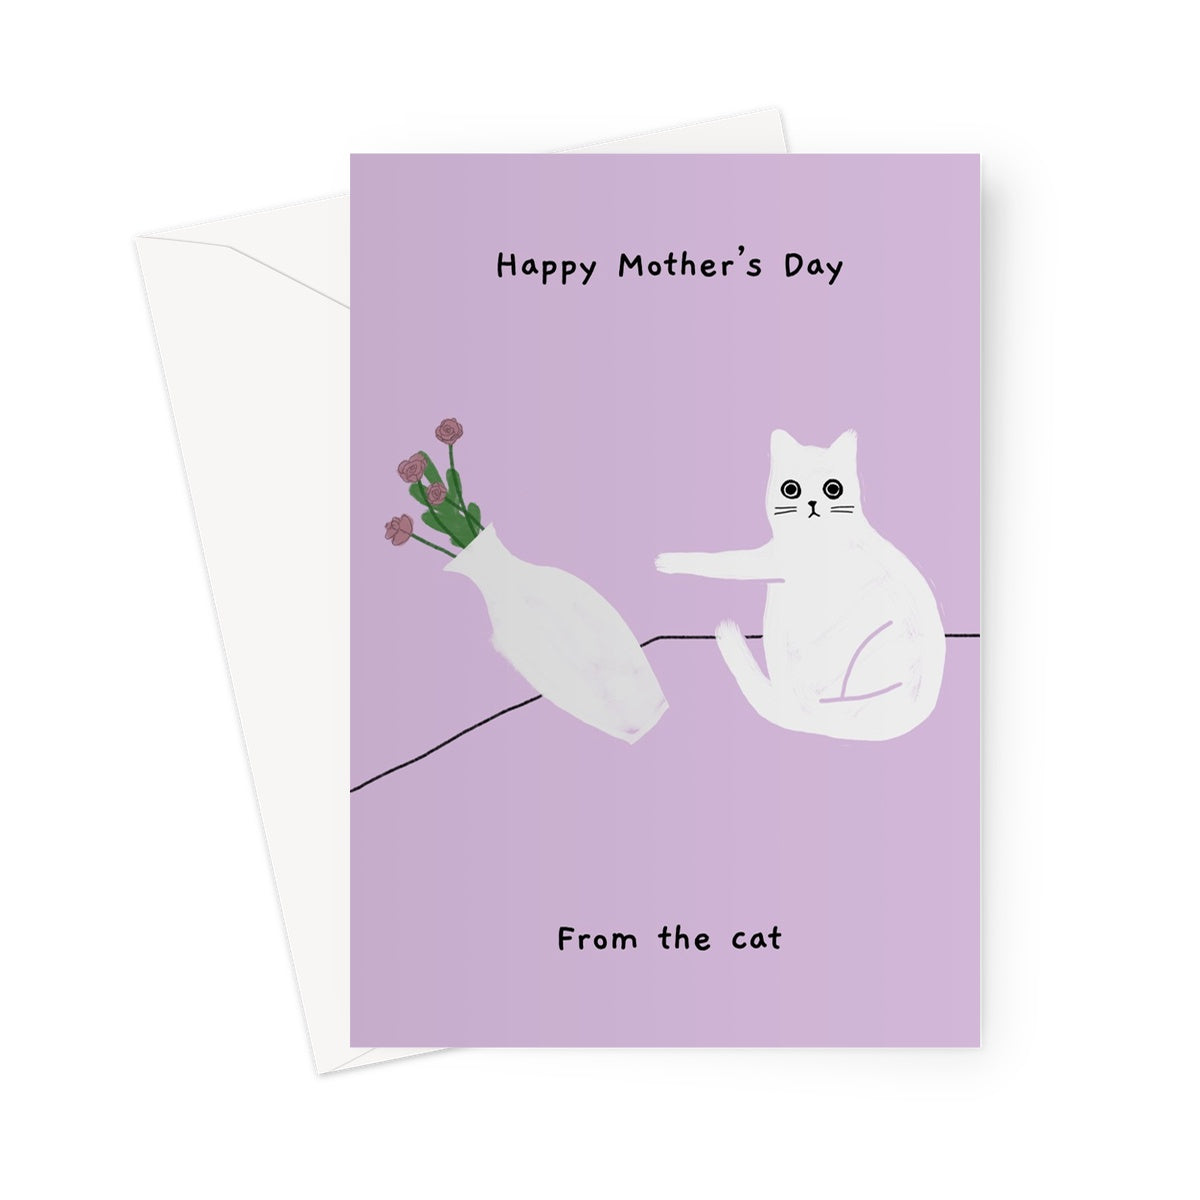 Happy Mother's Day - From the Cat